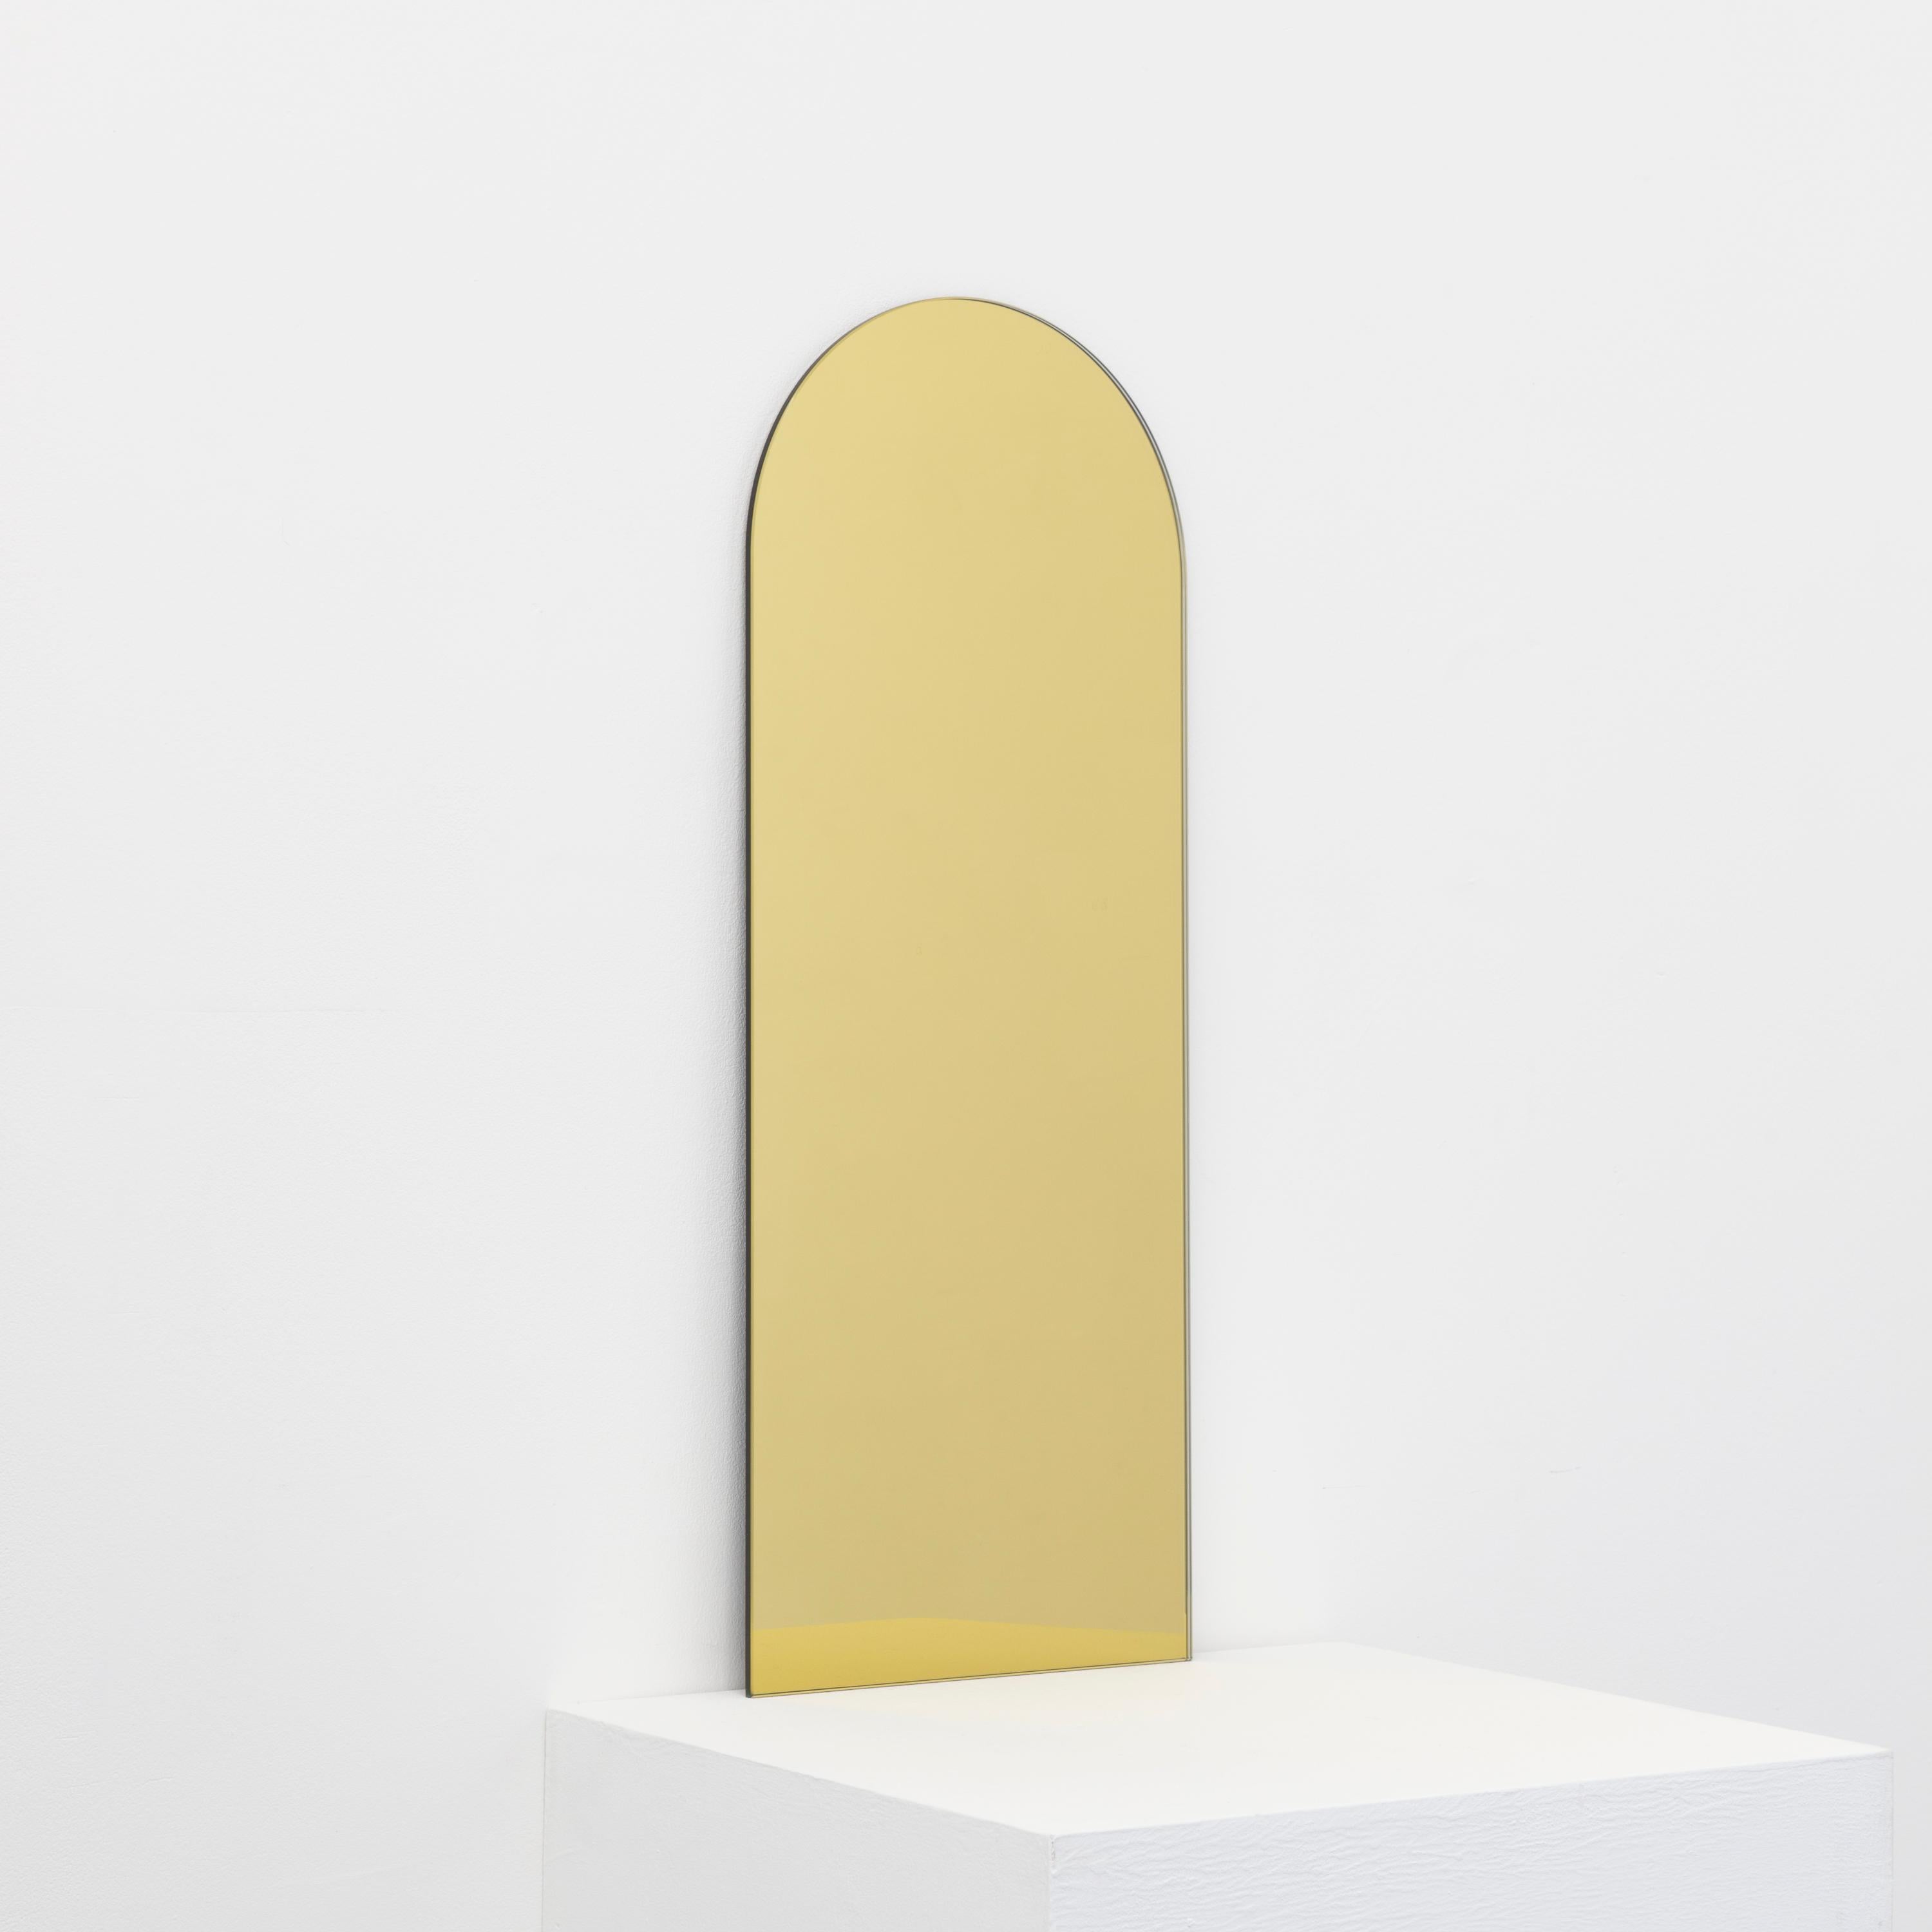 This mirror is available from stock.

Minimalist arch shaped gold tinted frameless mirror. Quality design that ensures the mirror sits perfectly parallel to the wall. Designed and made in London, UK.


Fitted with professional plates not visible